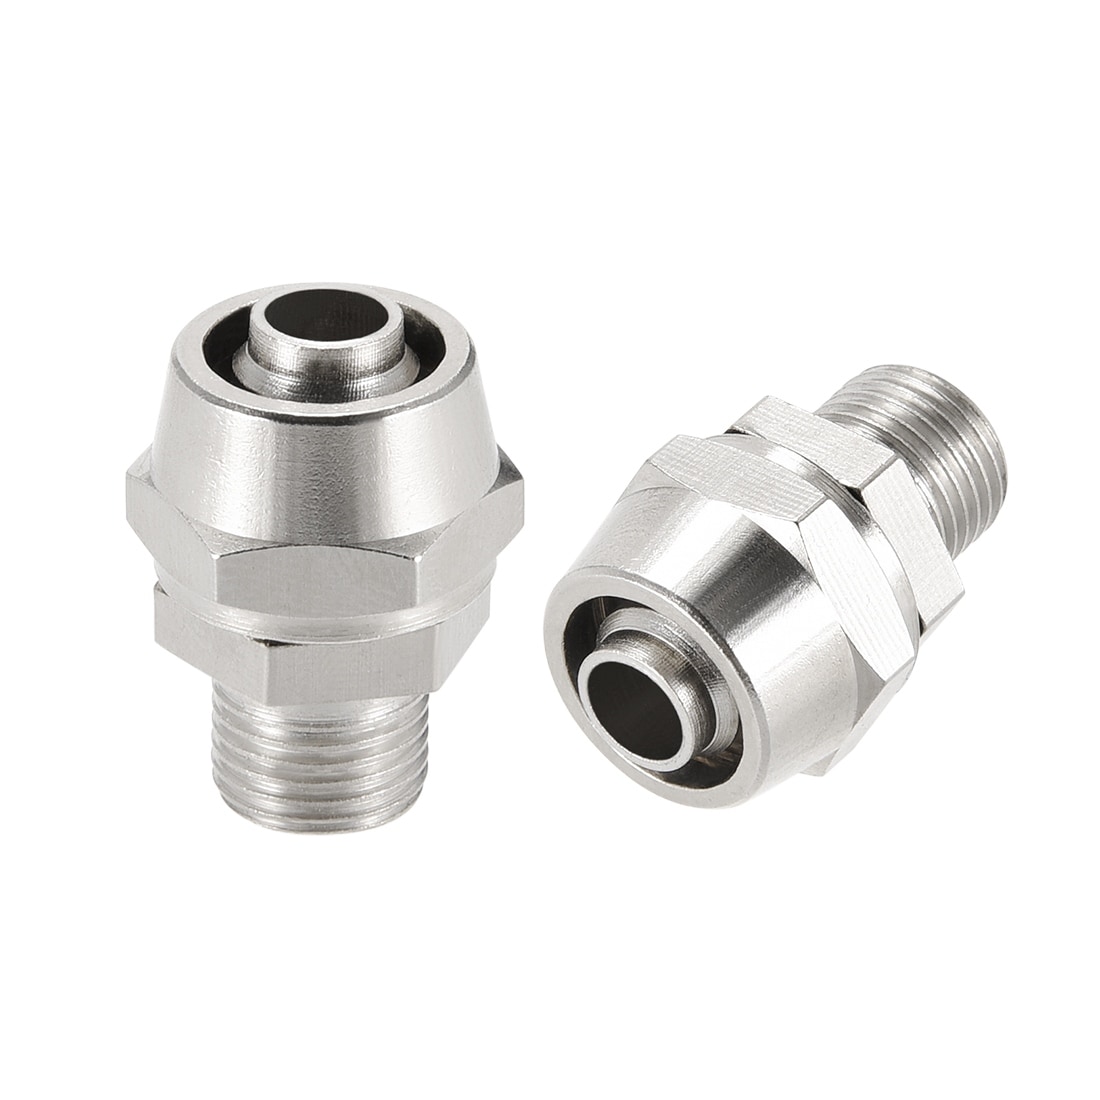 2Pcs Quickly Connect 5mm*8mm AiHose Fitting Coupler & Bayonet Connectors